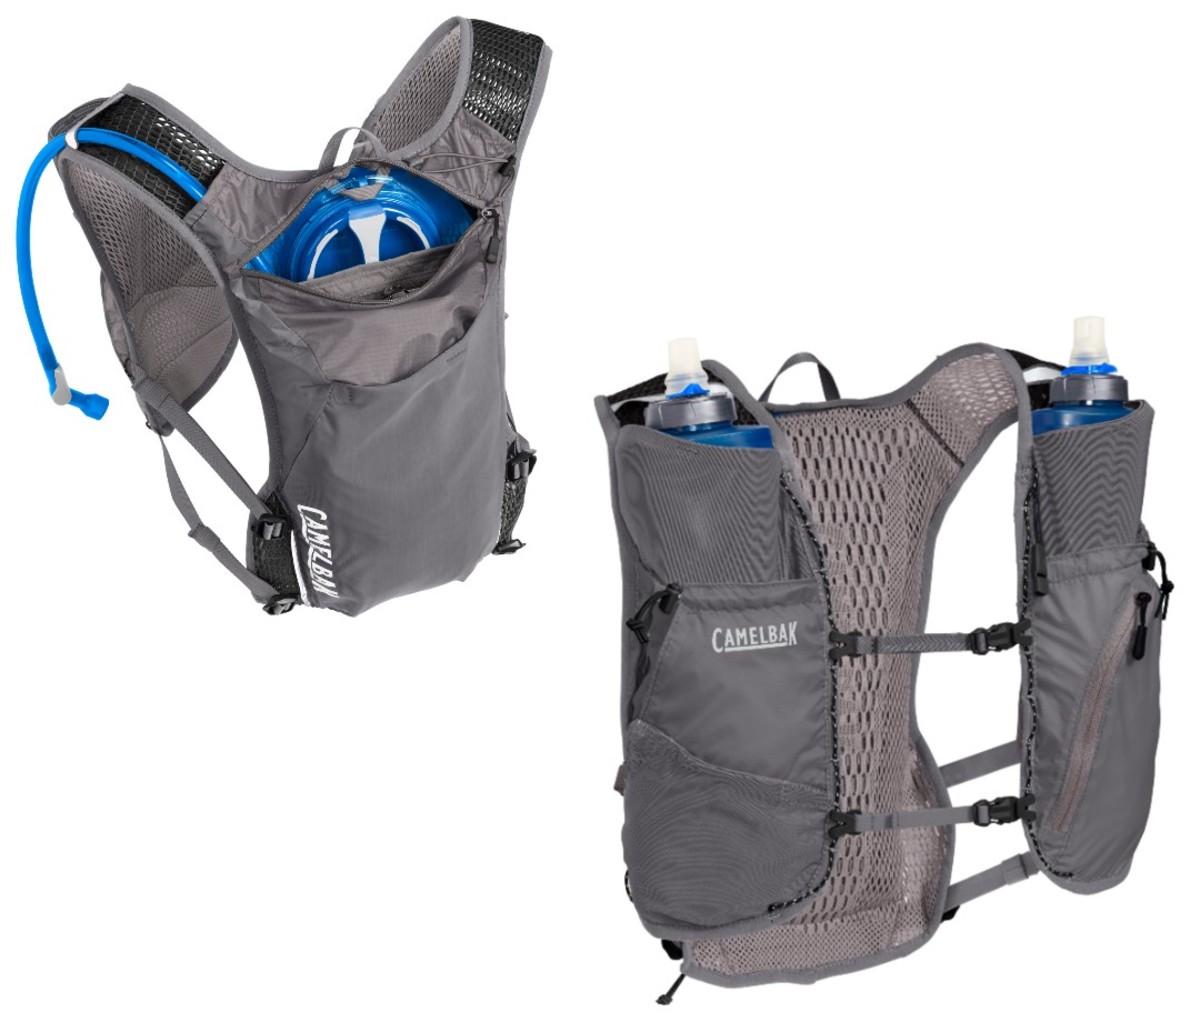 Two Camelbak Zephyr Vests, one with bottle inserts and another with hyrdration bladder insert